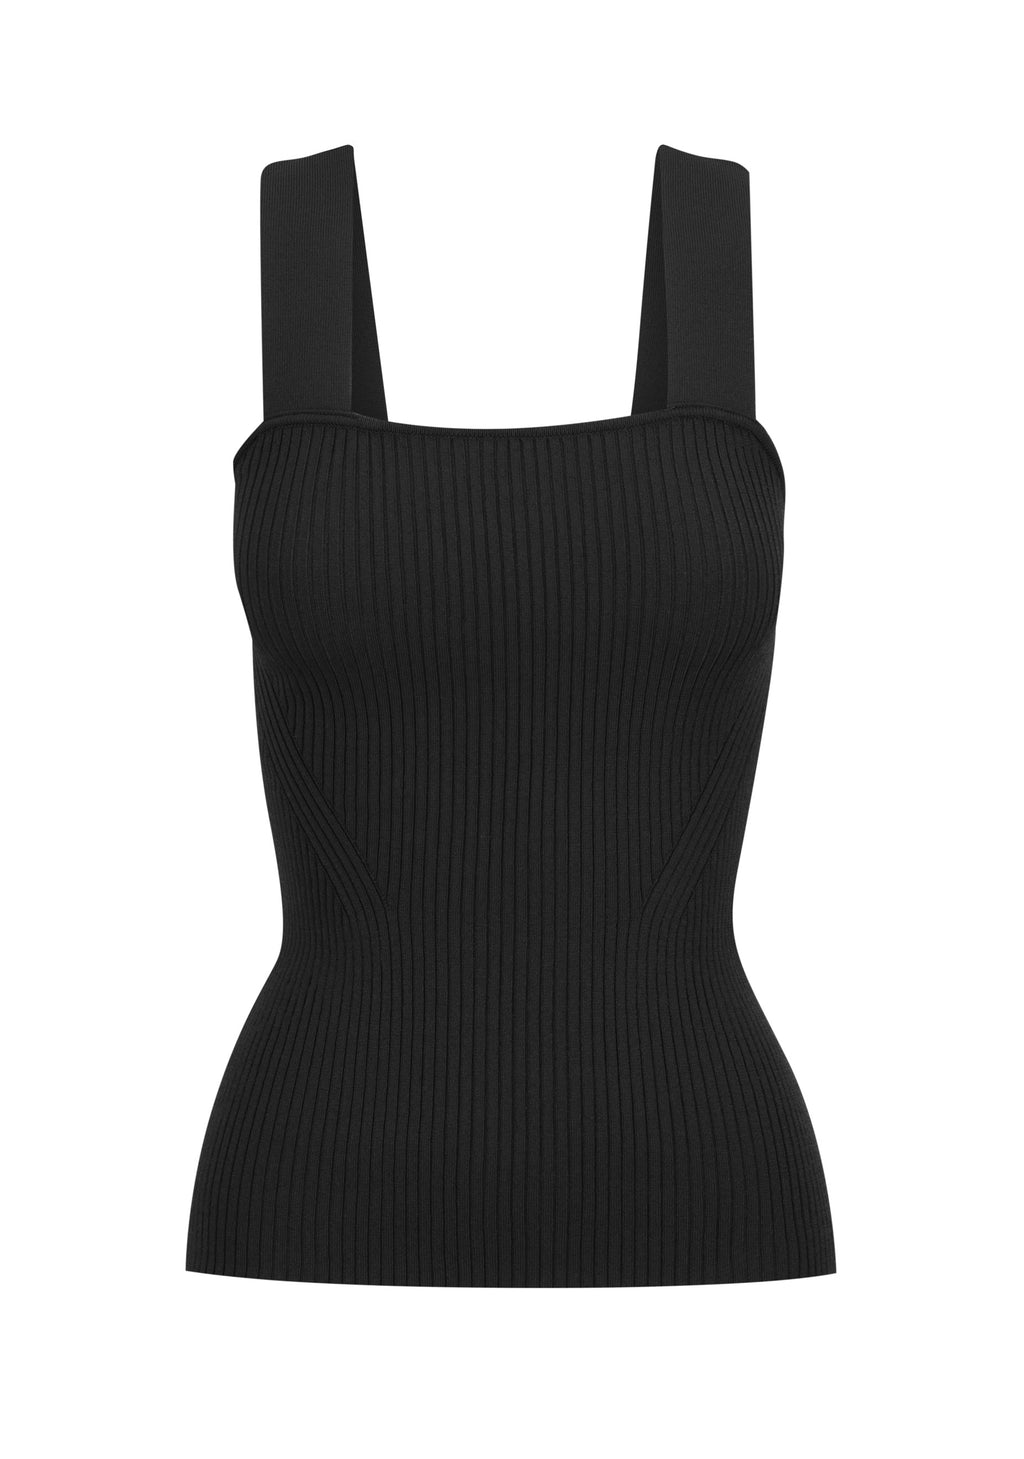 Black Shaping Camisole Top X11002